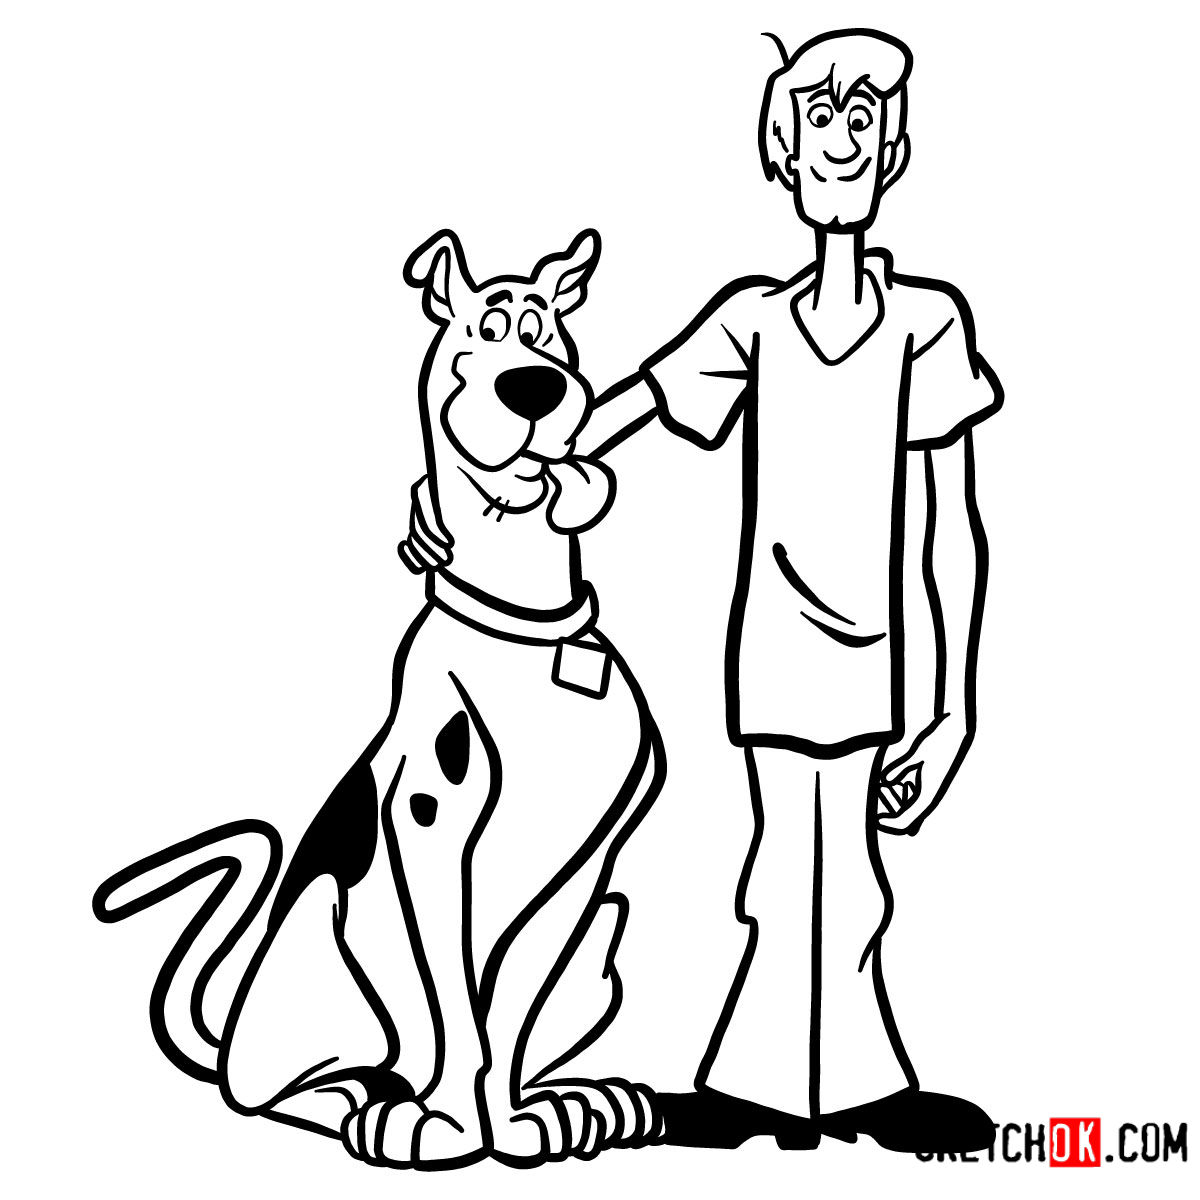 Step-by-step drawing guide of Scooby-Doo and Shaggy Rogers.